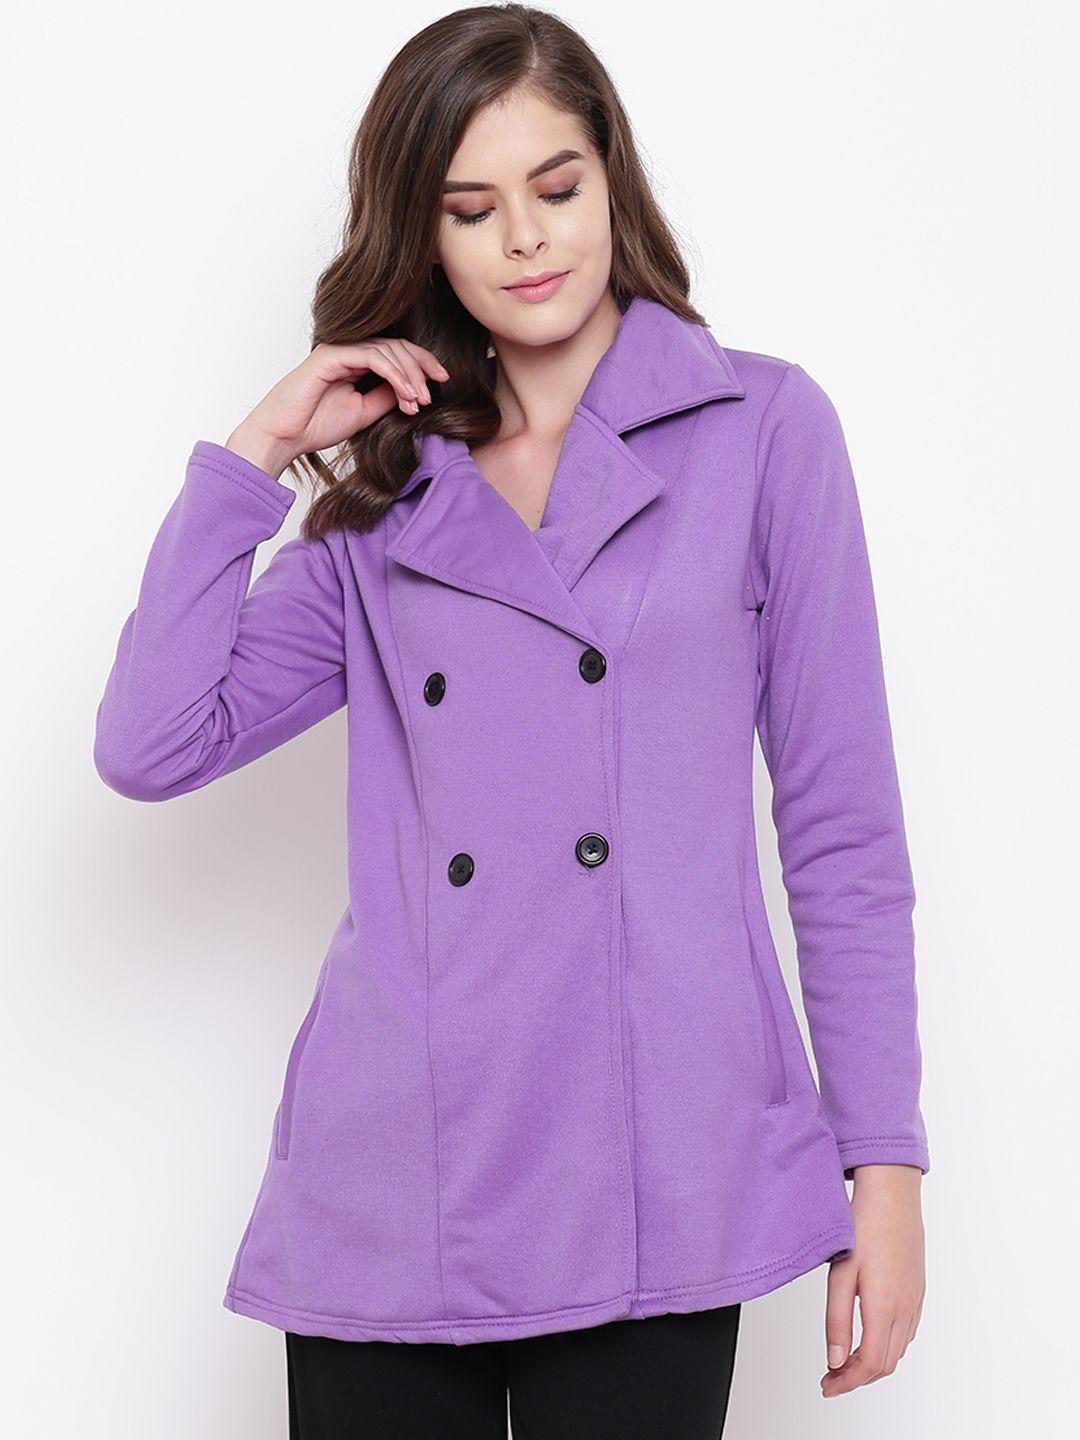 belle-fille-women-purple-solid-double-breasted-tailored-jacket